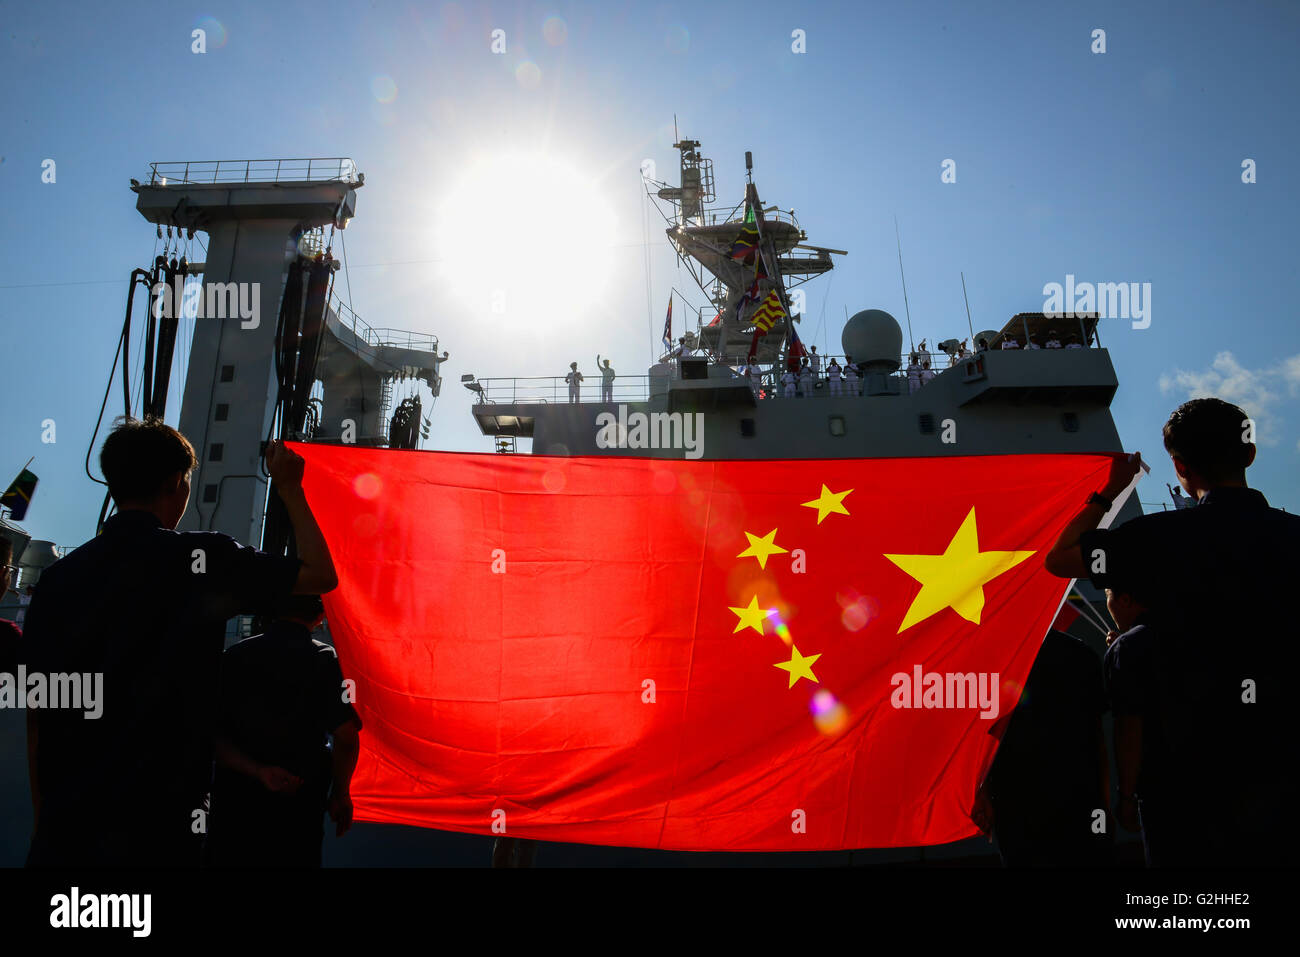 Dar Es Salaam, Tanzania. 30th May, 2016. Local Chinese holding Chinese national flag welcome?Chinese naval comprehensive supply ship?Taihu at Dar es Salaam, Tanzania, on May 30, 2016. Three Chinese navy ships on Monday docked at Tanzania's Dar es Salaam Port for a four-day visit, aimed at sharing experience with their Tanzanian counterparts in how to curb piracy in the Indian Ocean. © Zhai Jianlan/Xinhua/Alamy Live News Stock Photo